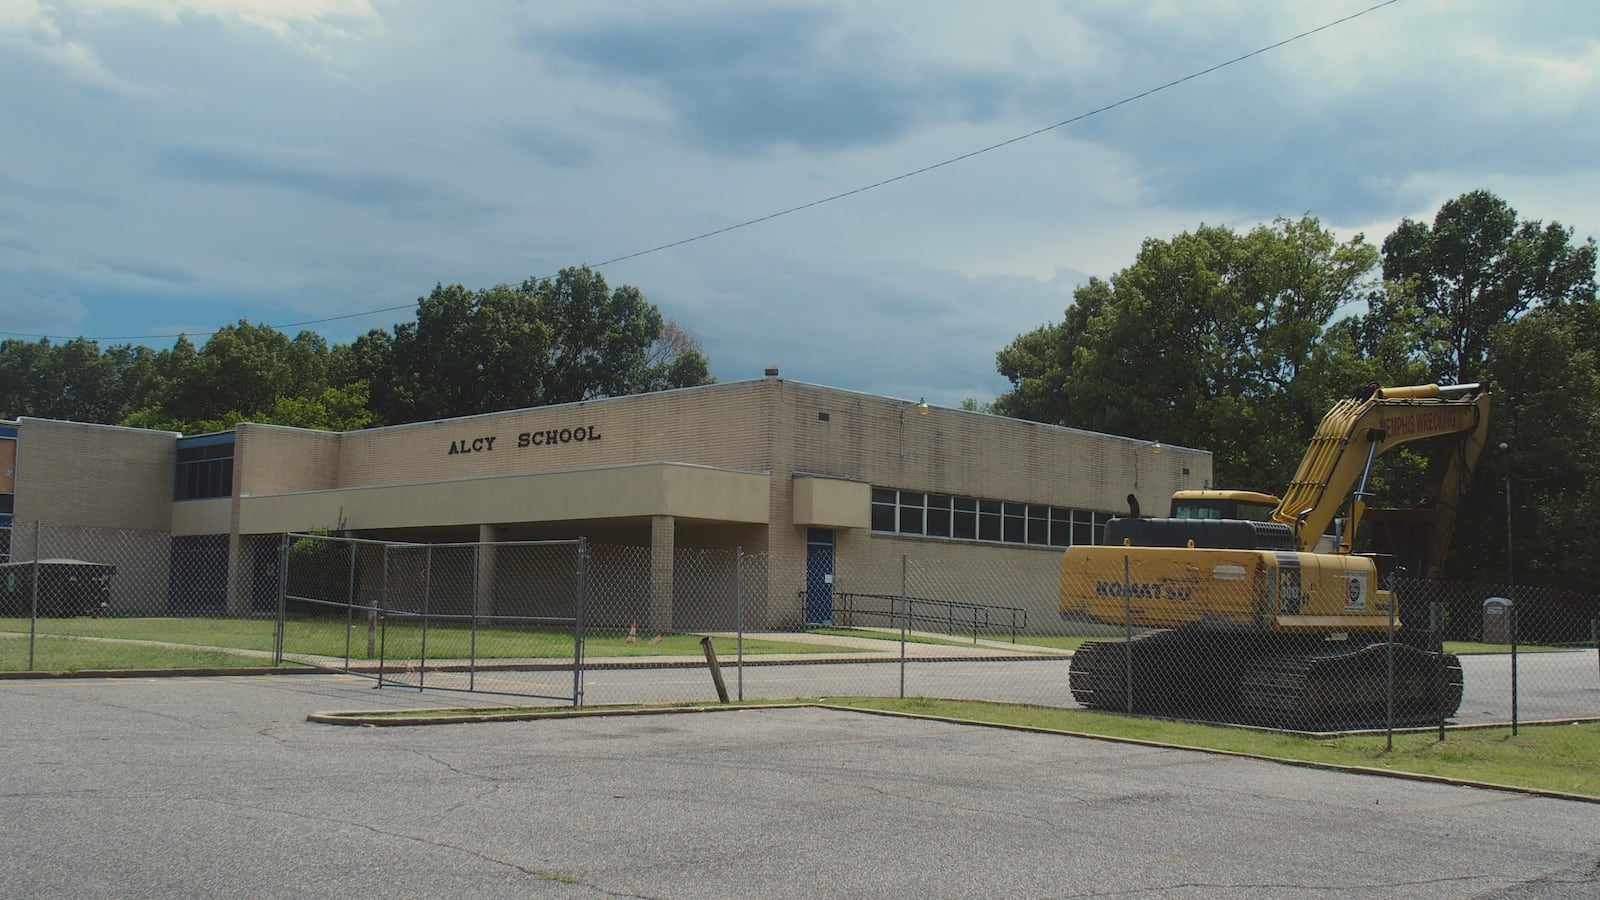 Alcy Elementary Schools is being demolished this summer to make way for a new building on the same property that will also house students from Charjean and Magnolia elementary schools.